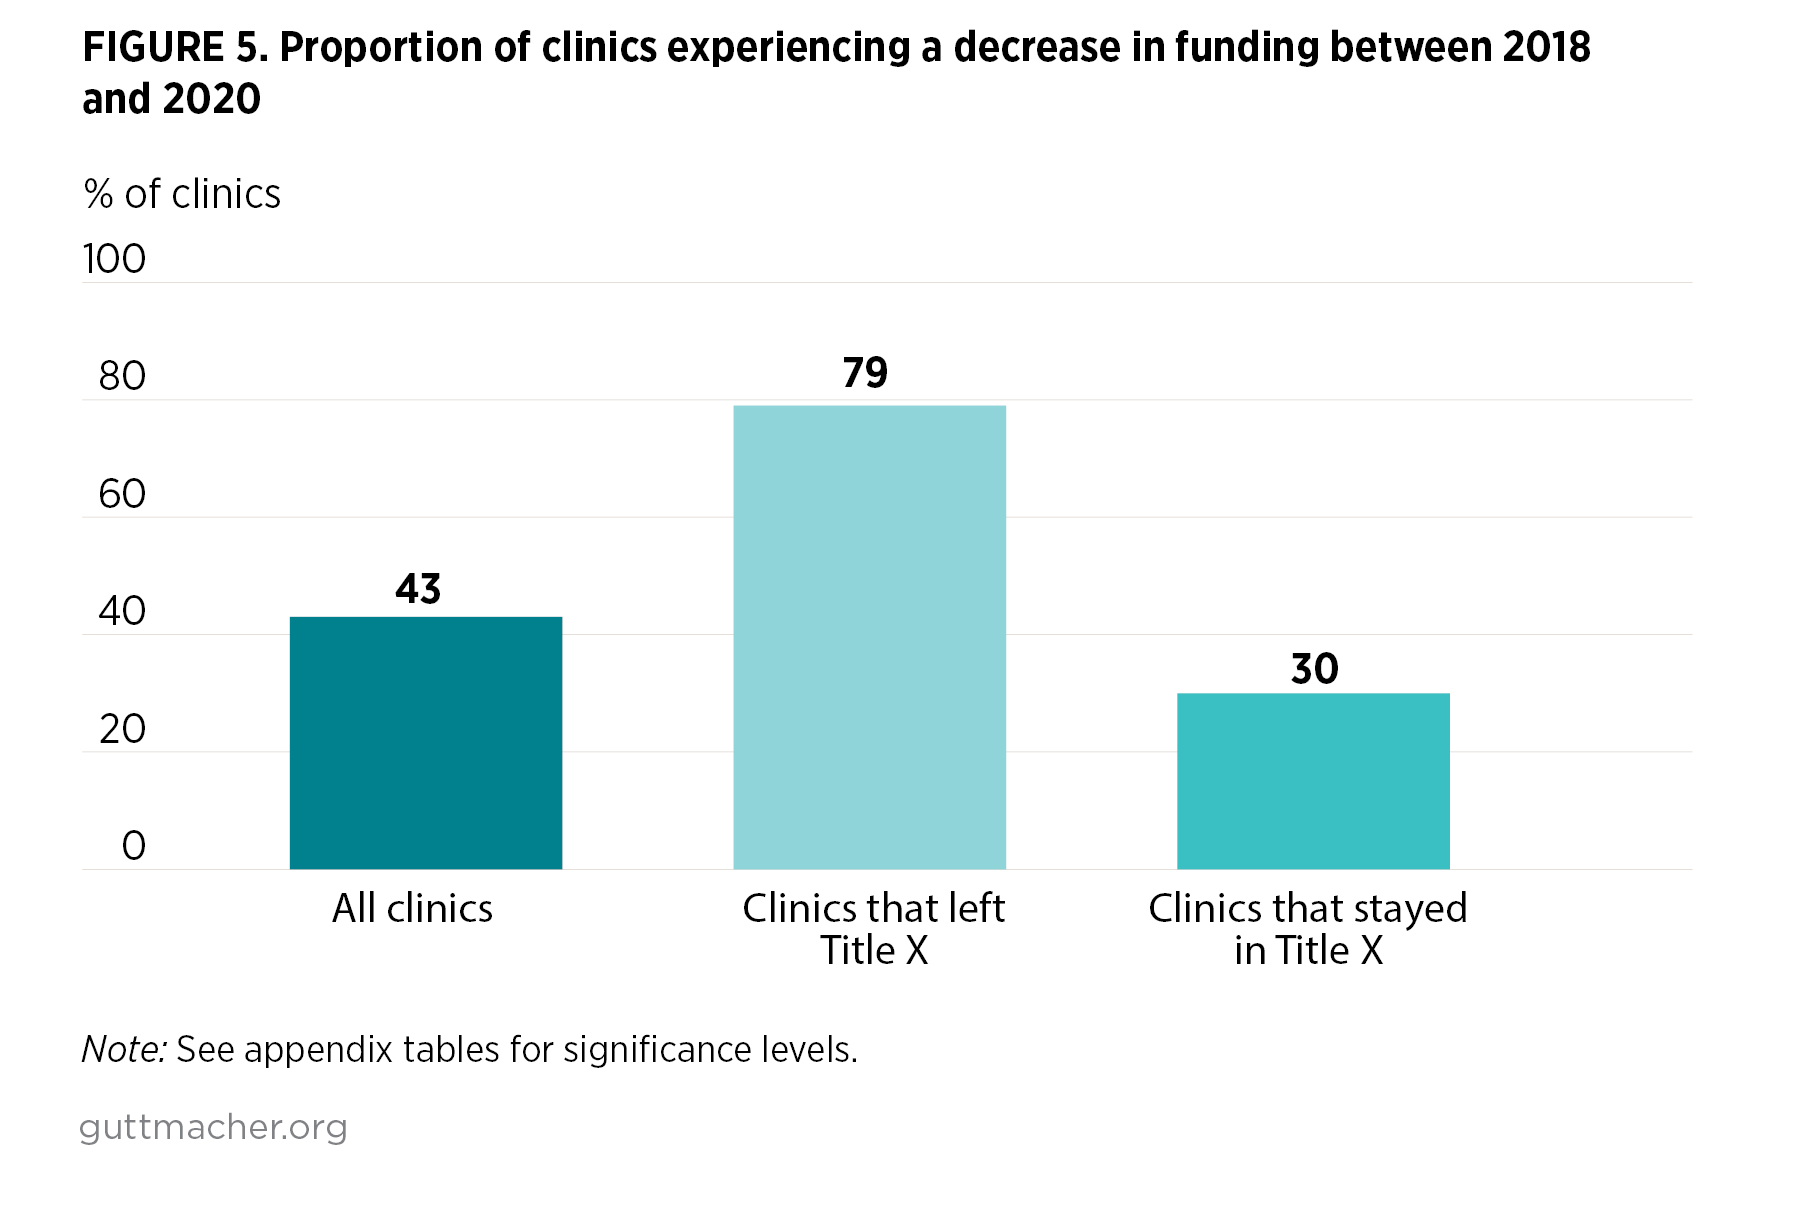 Bar chart showing Proportion of clinics experiencing a decrease in funding between 2018 and 2020